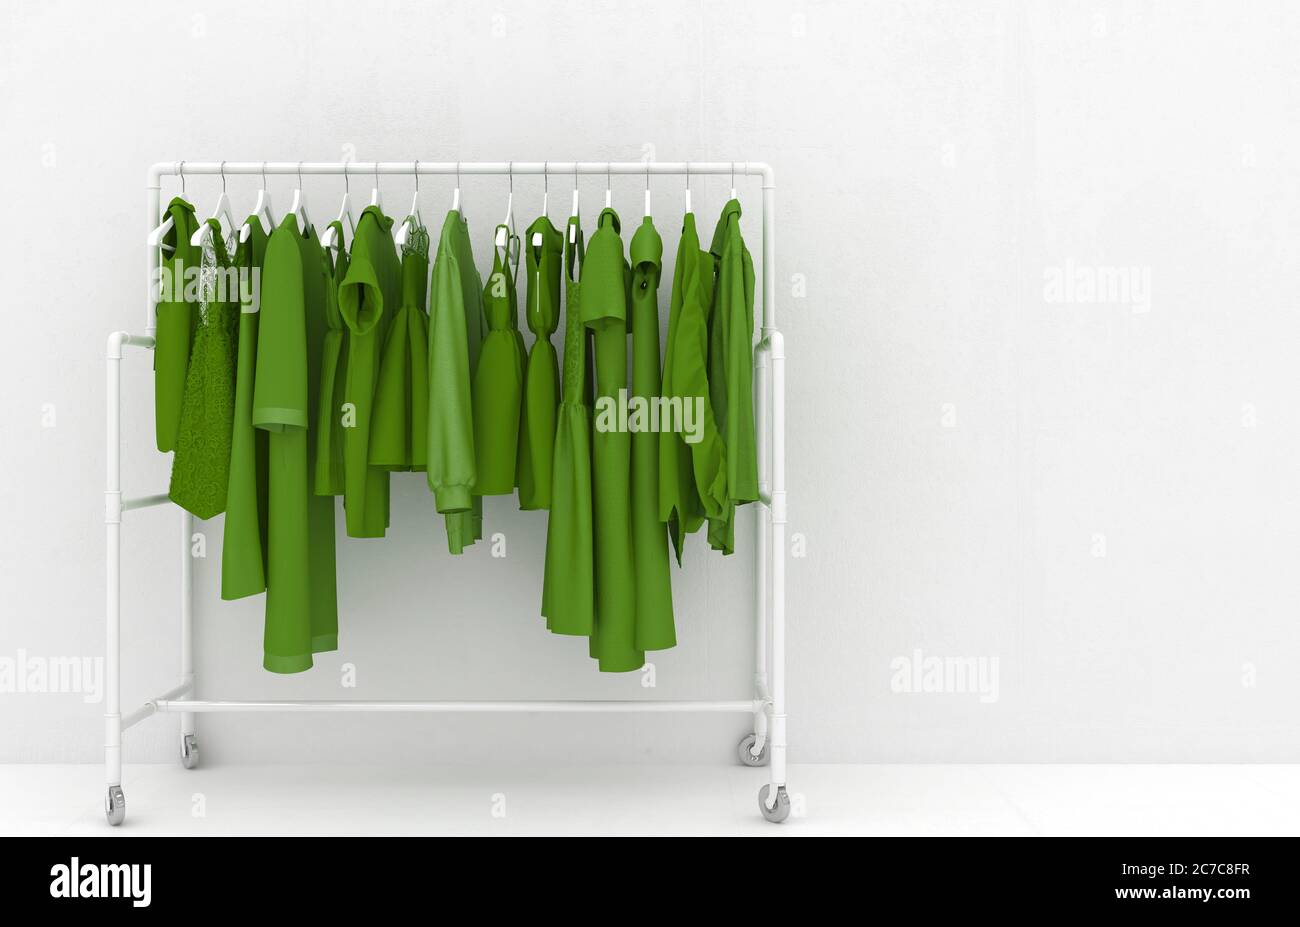 Hanger with green women's clothing against the background of a white wall. Monotonous green clothes. Creative conceptual illustration with copy space. Stock Photo